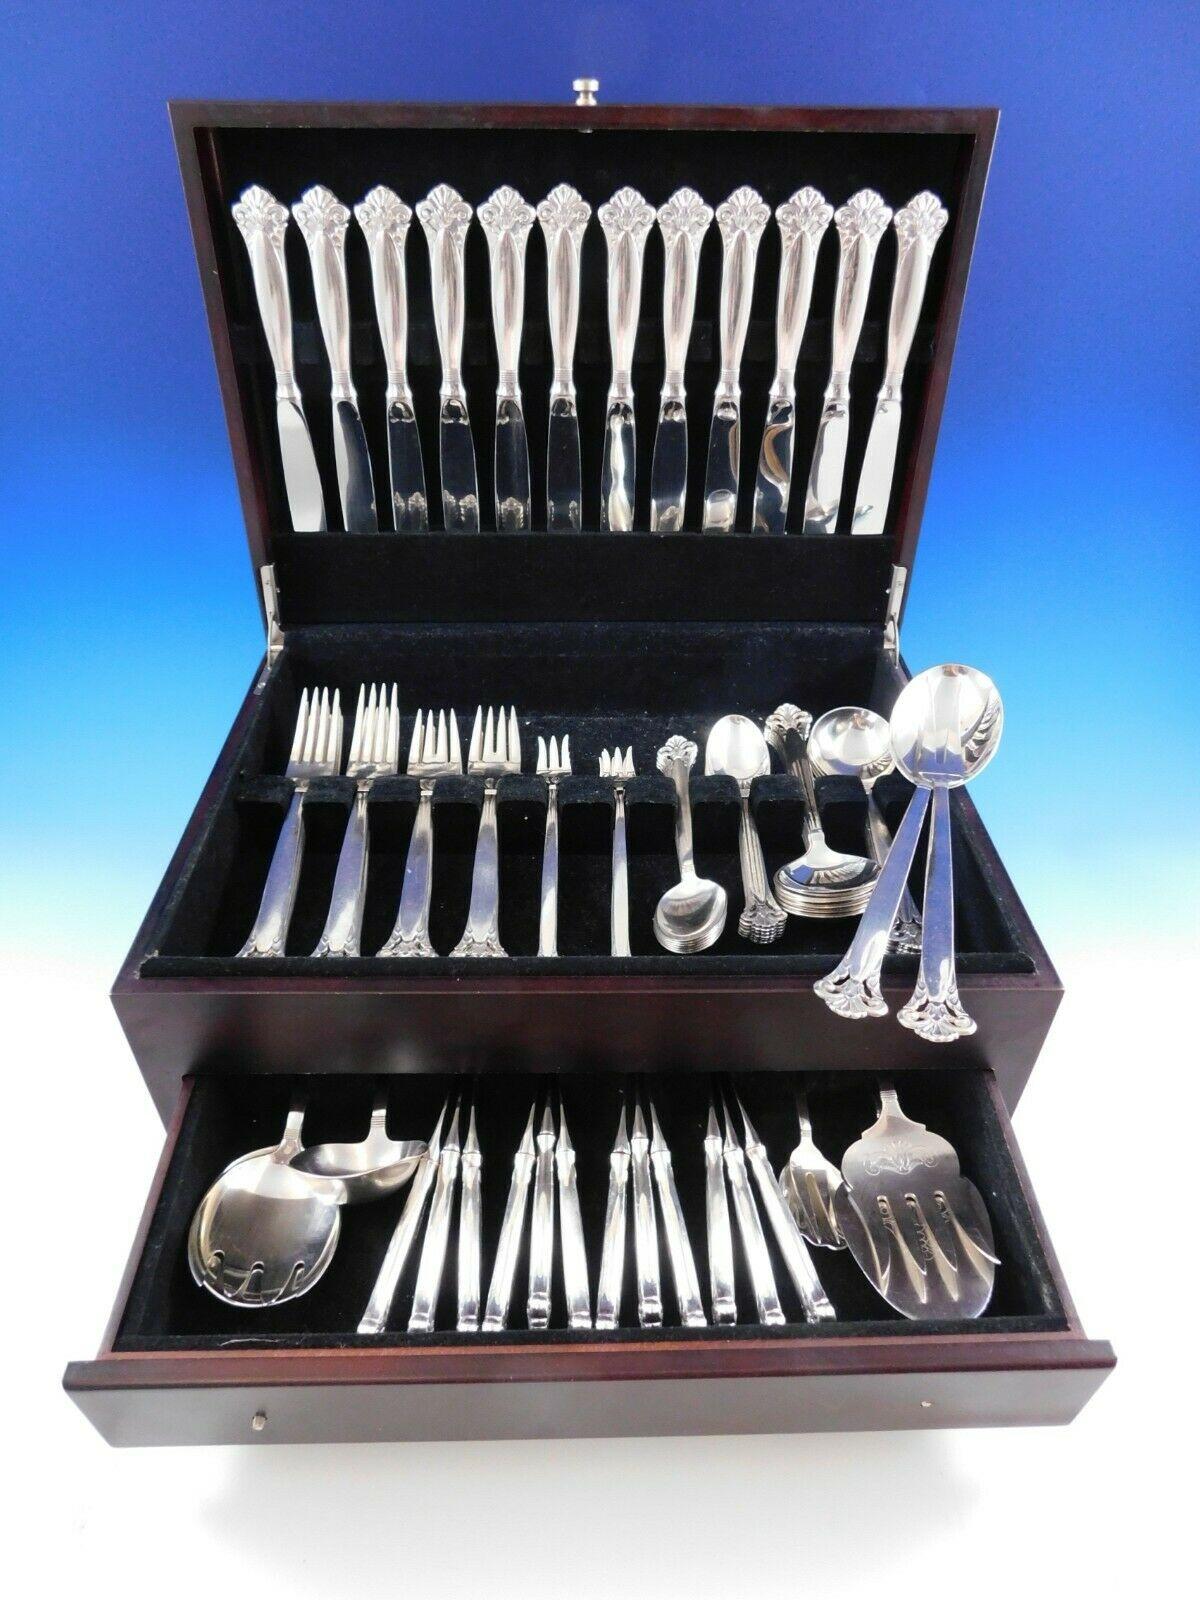 Scarce Cloister by Marthinsen, Norwegian, pierced handle Sterling Silver flatware set - 92 pieces. This set includes:



12 dinner knives, 9 1/8